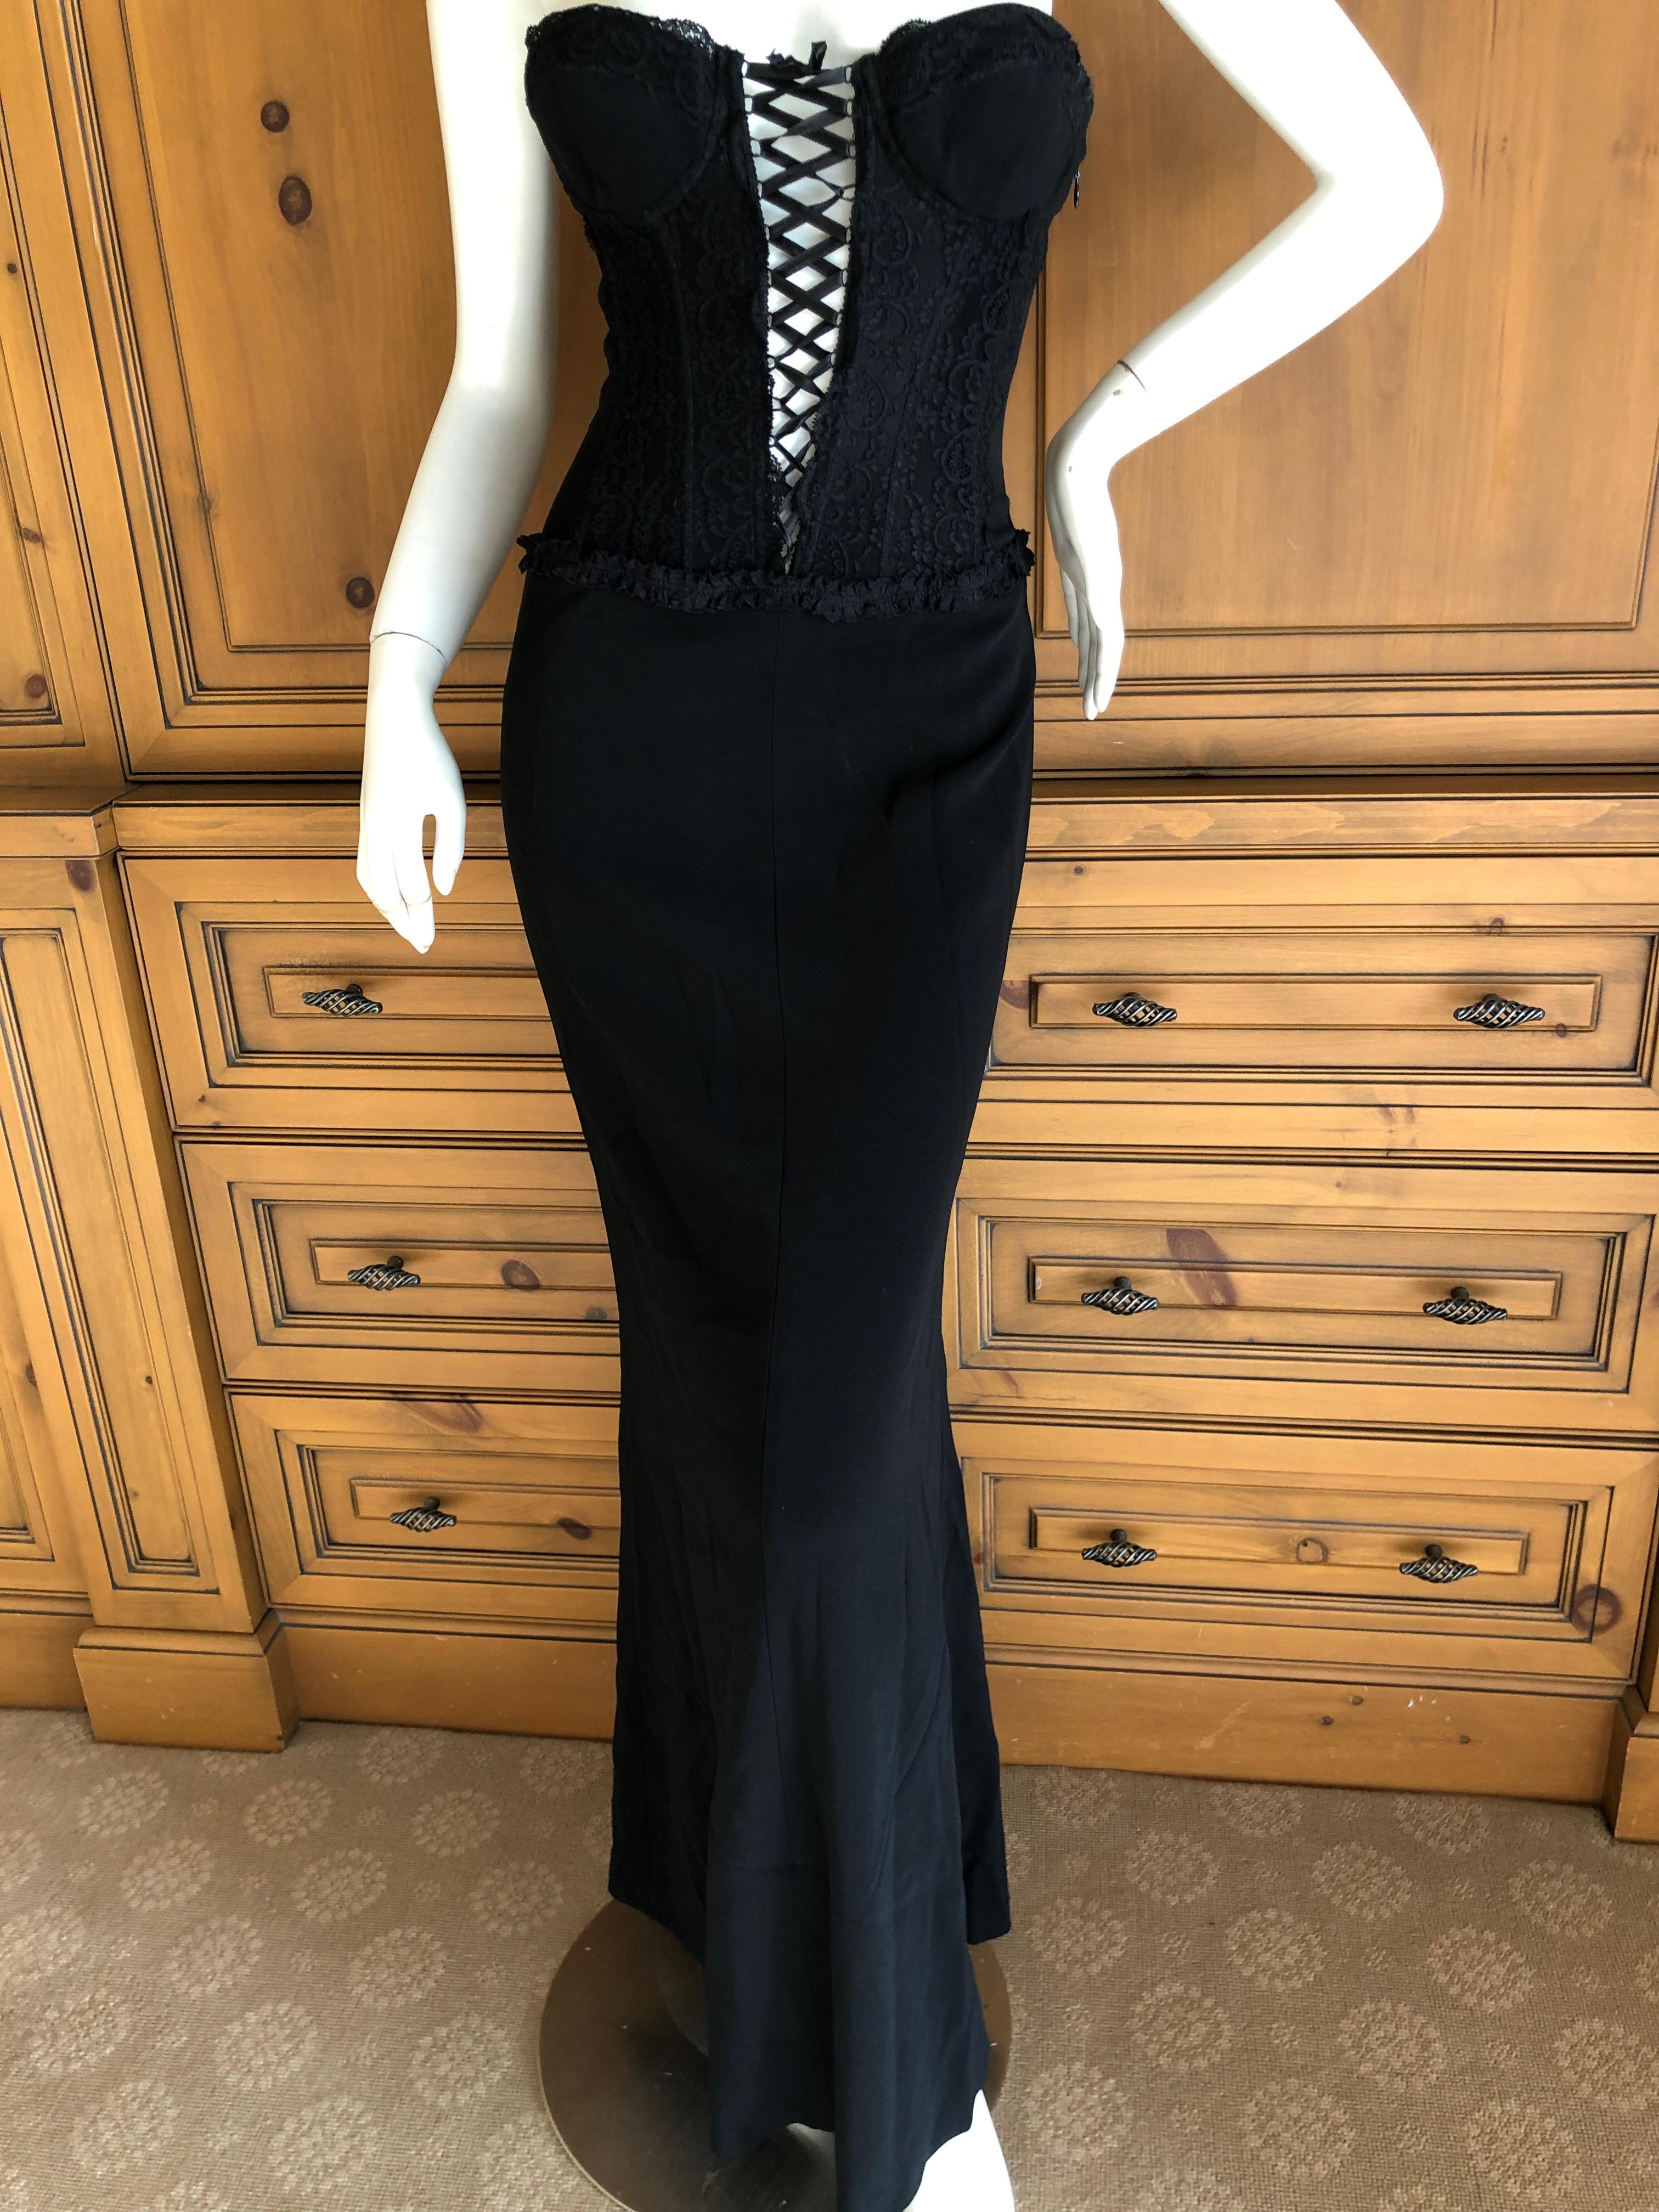 Moschino Cheap & Chic Vintage 1980's Plunging Corset Lace Evening Dress For Sale 1